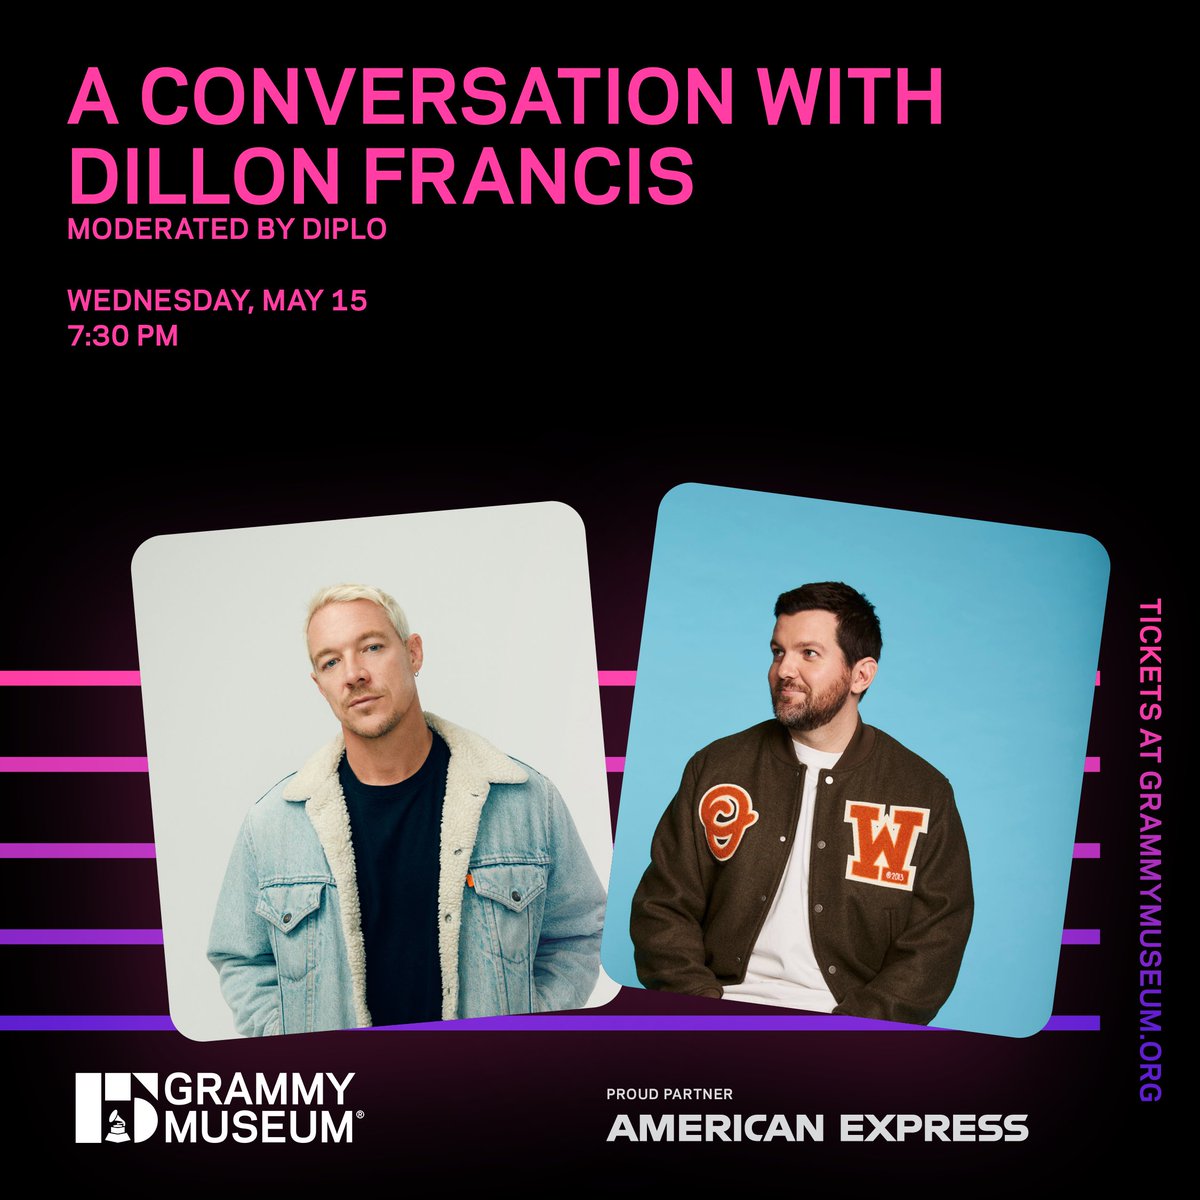 Move it to the #GRAMMYMuseum for a night with @DillonFrancis! 💫 Don't miss his conversation with moderator @Diplo to celebrate the 10-year anniversary of Dillon's hit track 'Get Low.' Get #AmexPresale tickets (#withAmex terms apply): grm.my/4aQNSsV